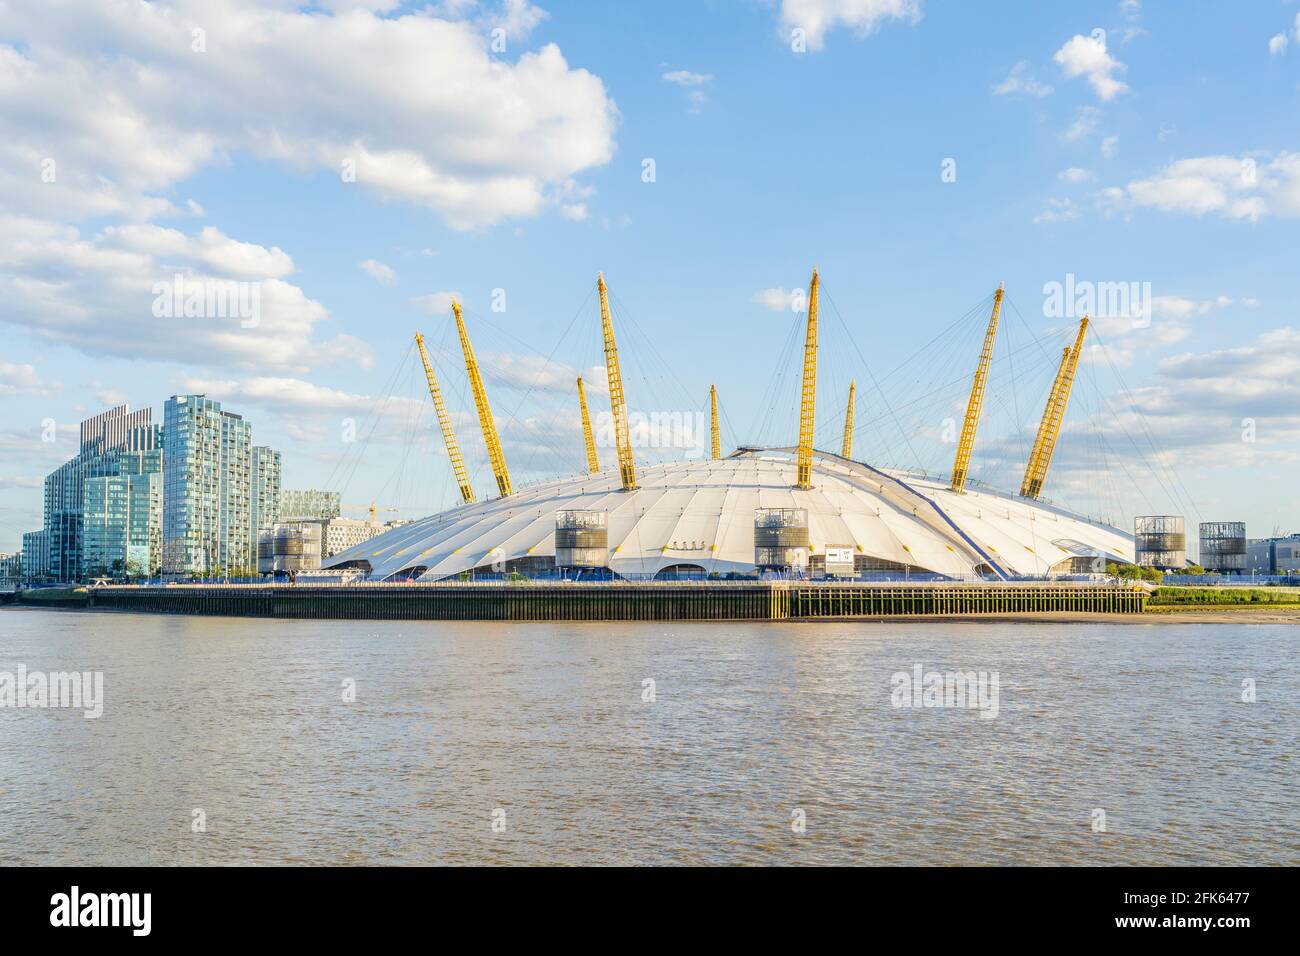 July 2020. London. Millenium Dome and the River Thames, London, England Stock Photo